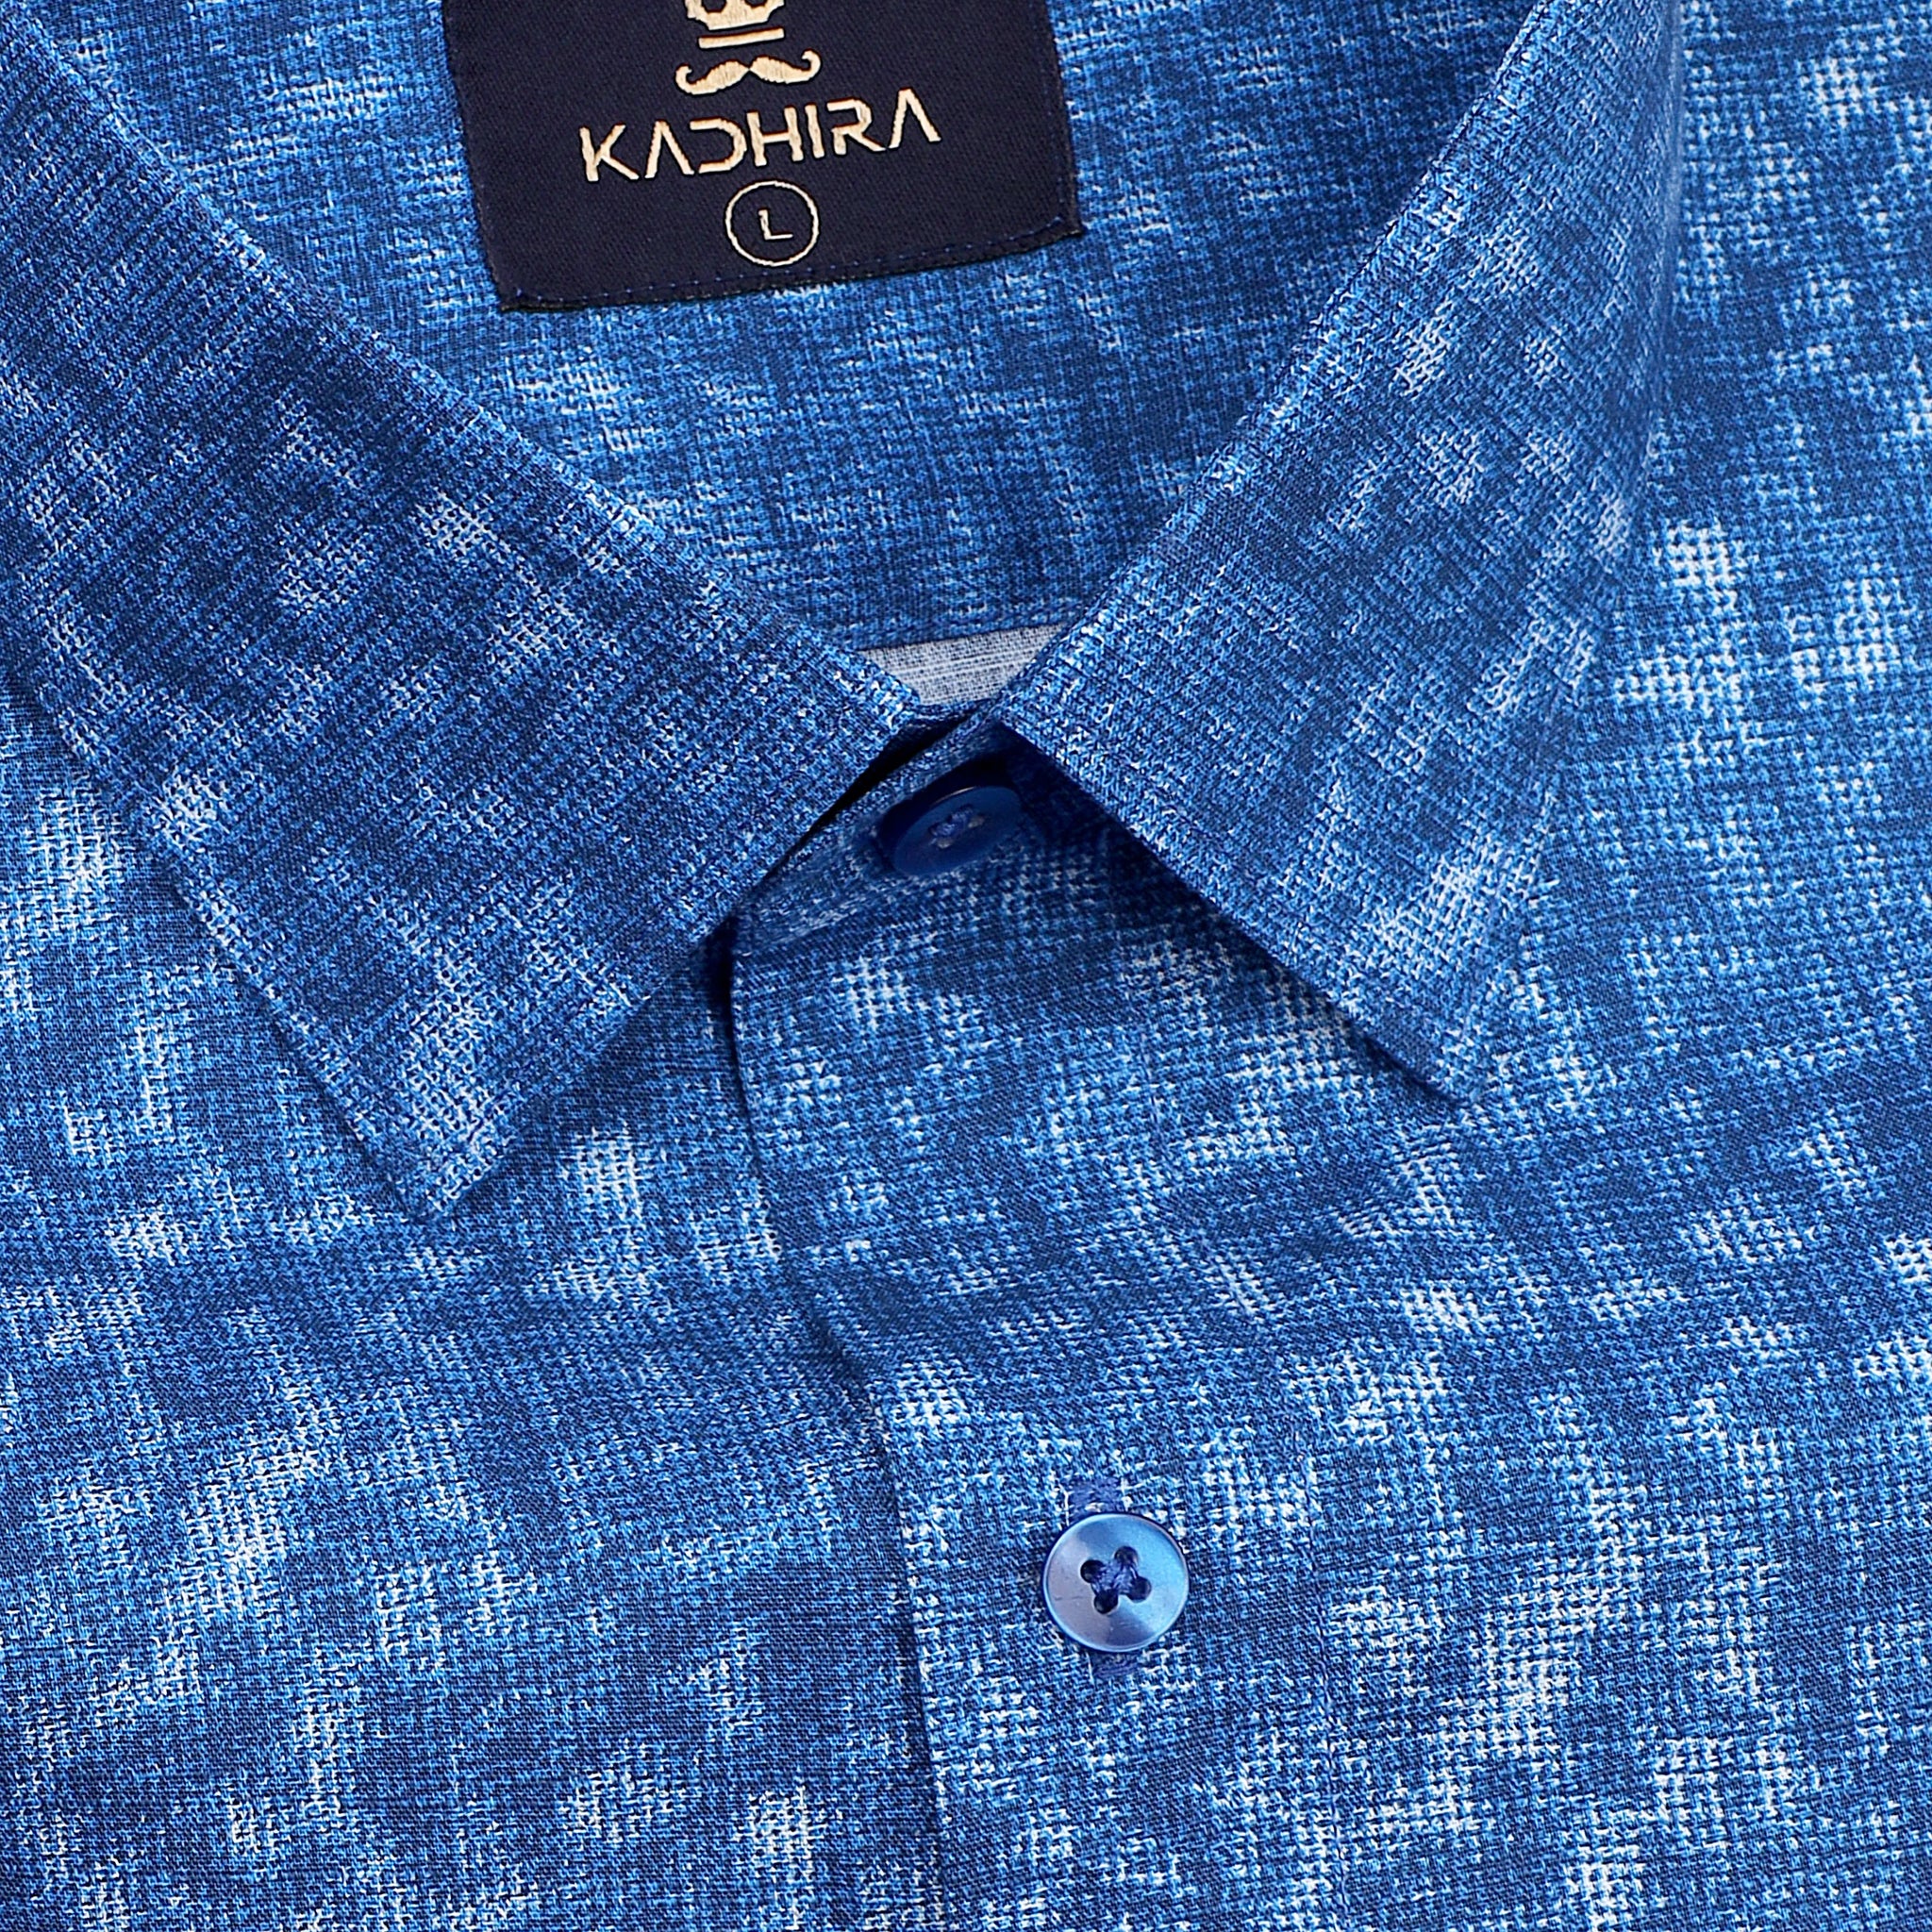 Yale Blue With White Spread Printed  Premium Cotton Shirt